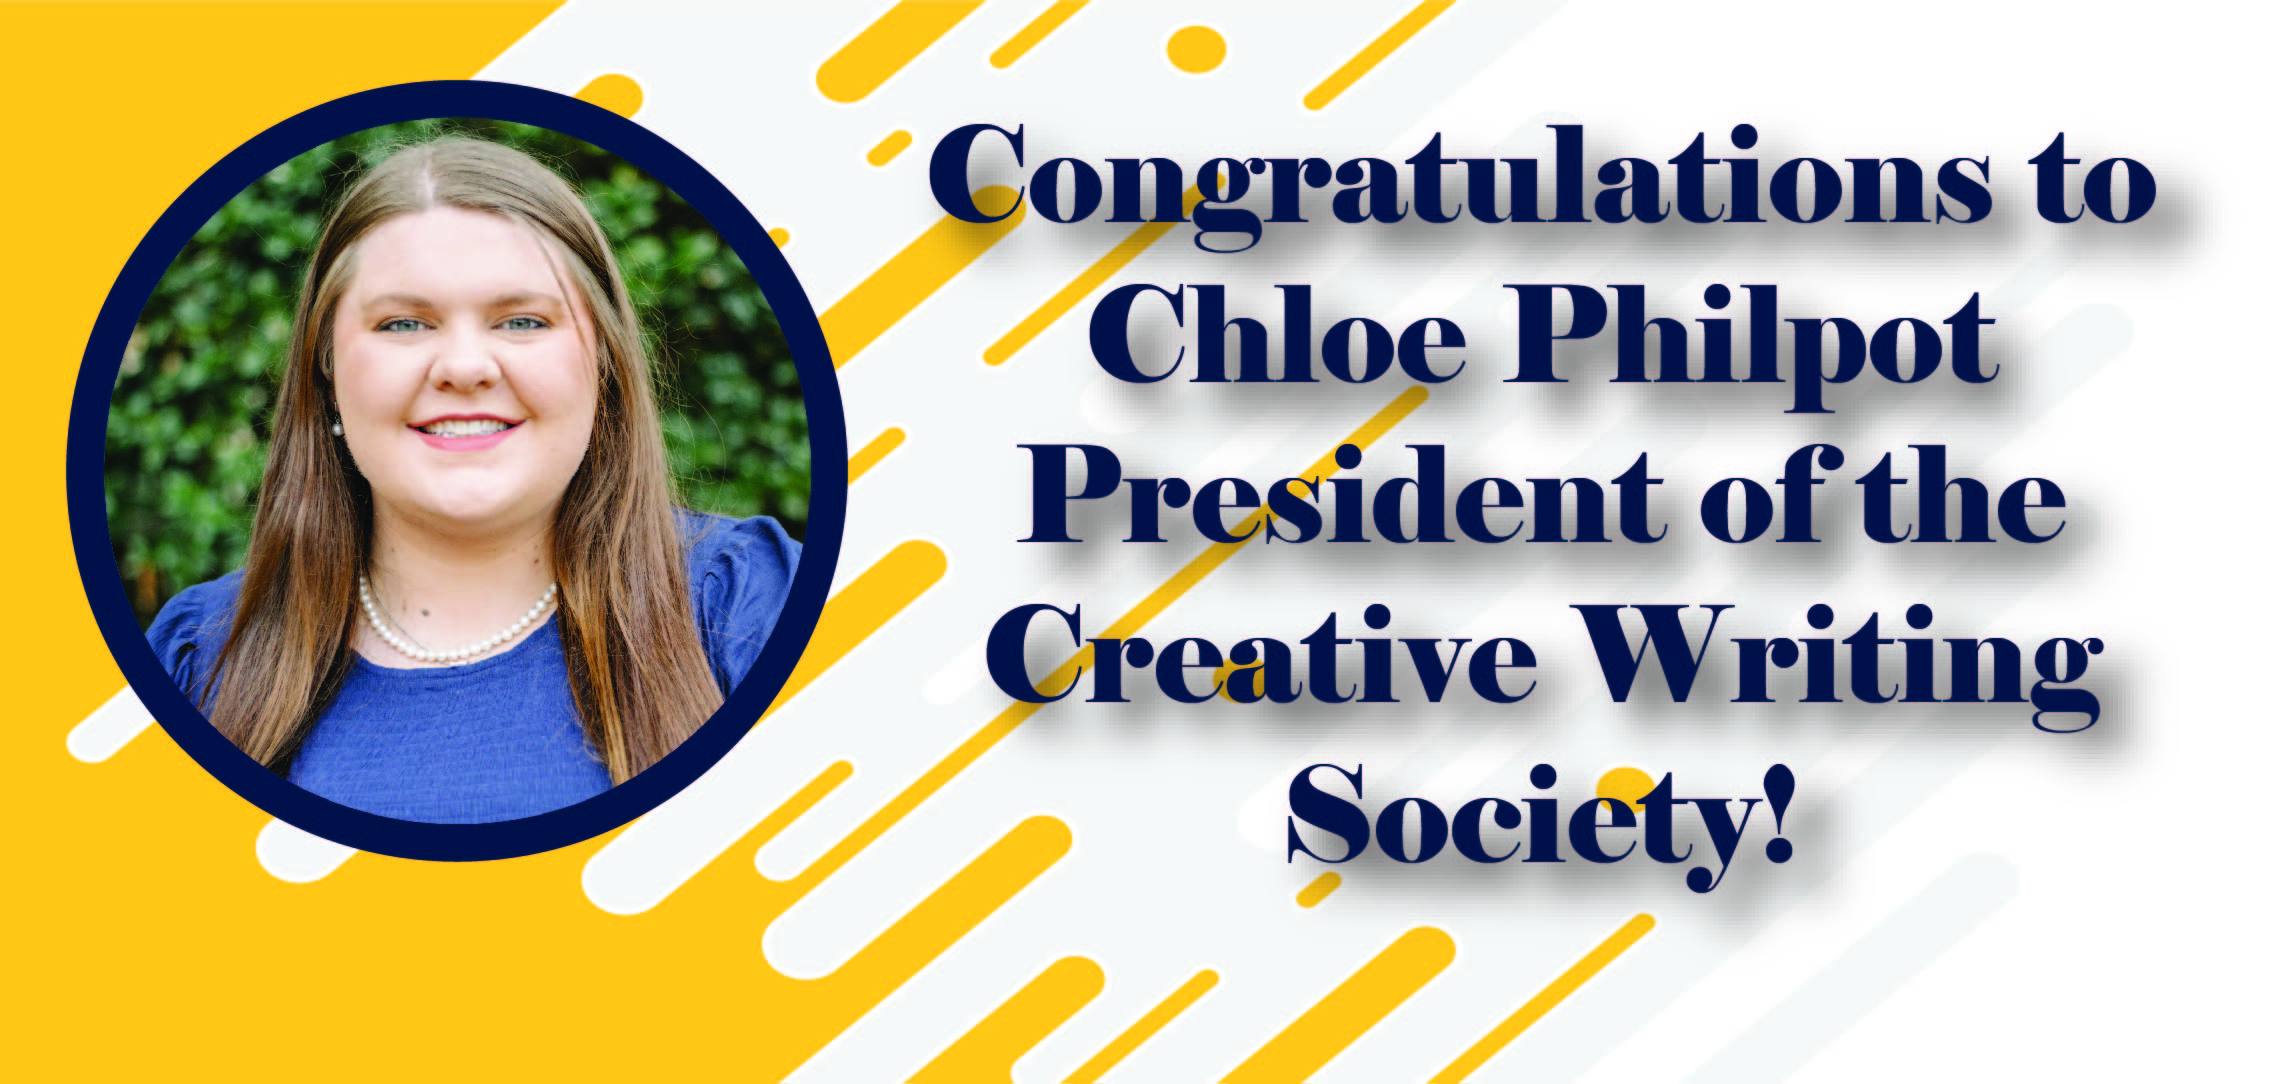 Abstract gold and white background with a picture of Chole Philpot on the left. The right side text says, "Congratulations to Chole Philpot President of the Creative Writing Society!"